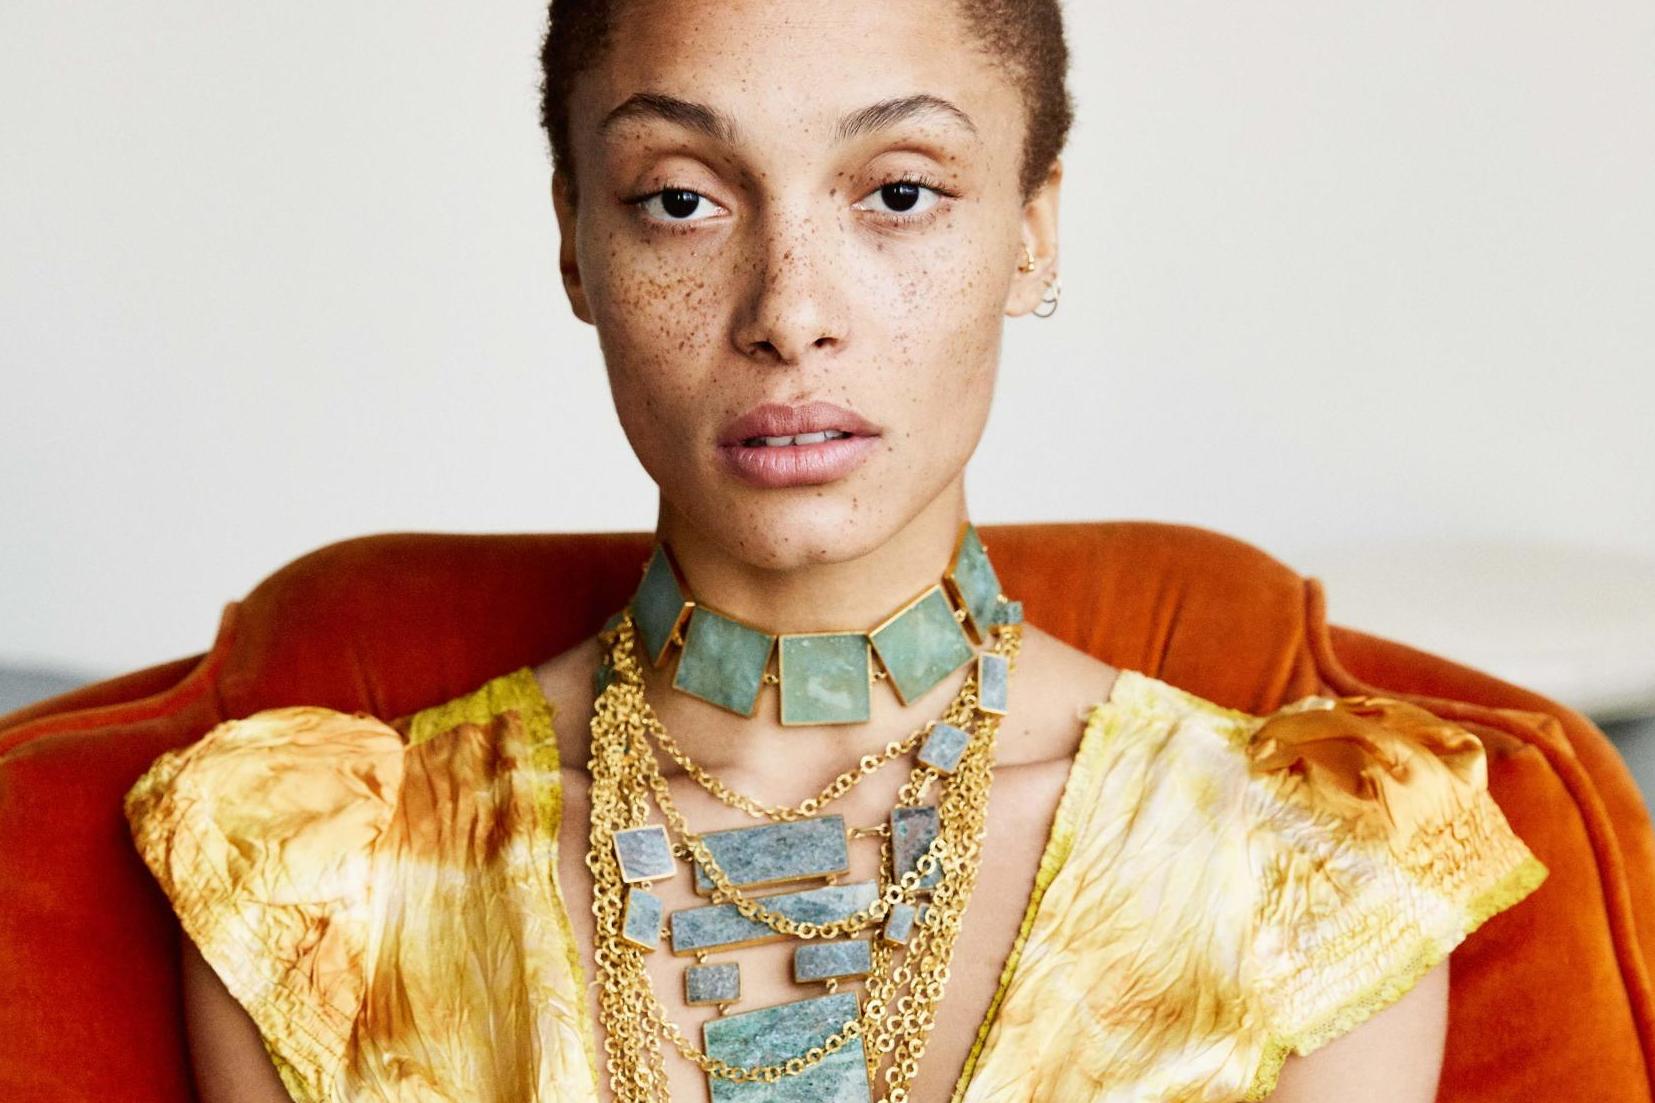 Adwoa Aboah fronting a campaign for Pippa Small